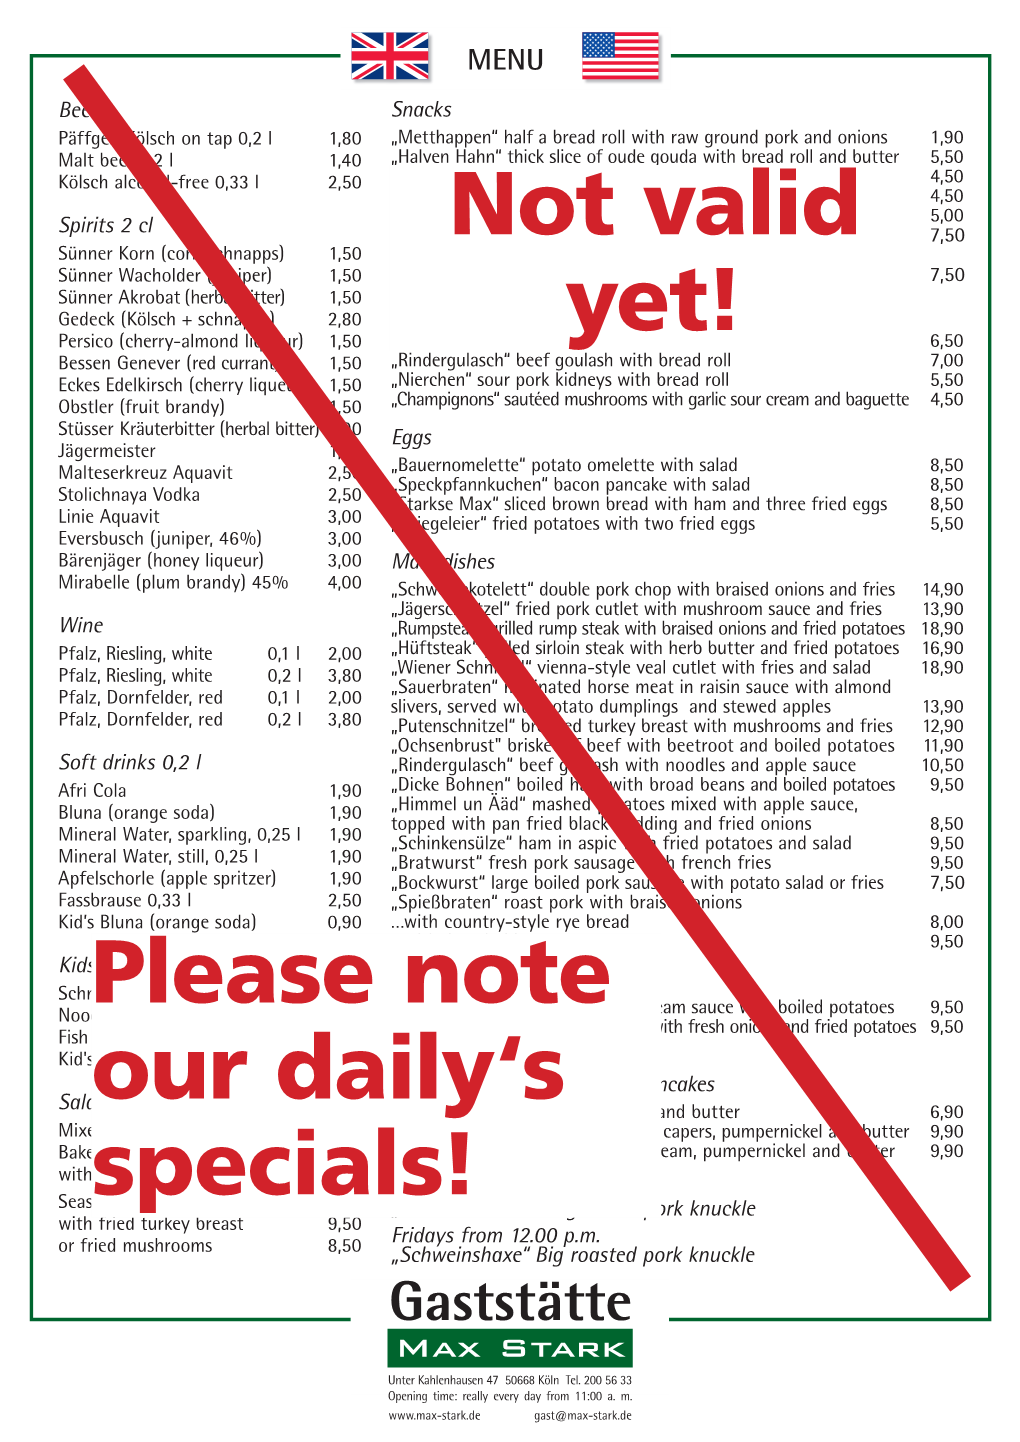 Not Valid Yet! Please Note Our Daily's Specials!